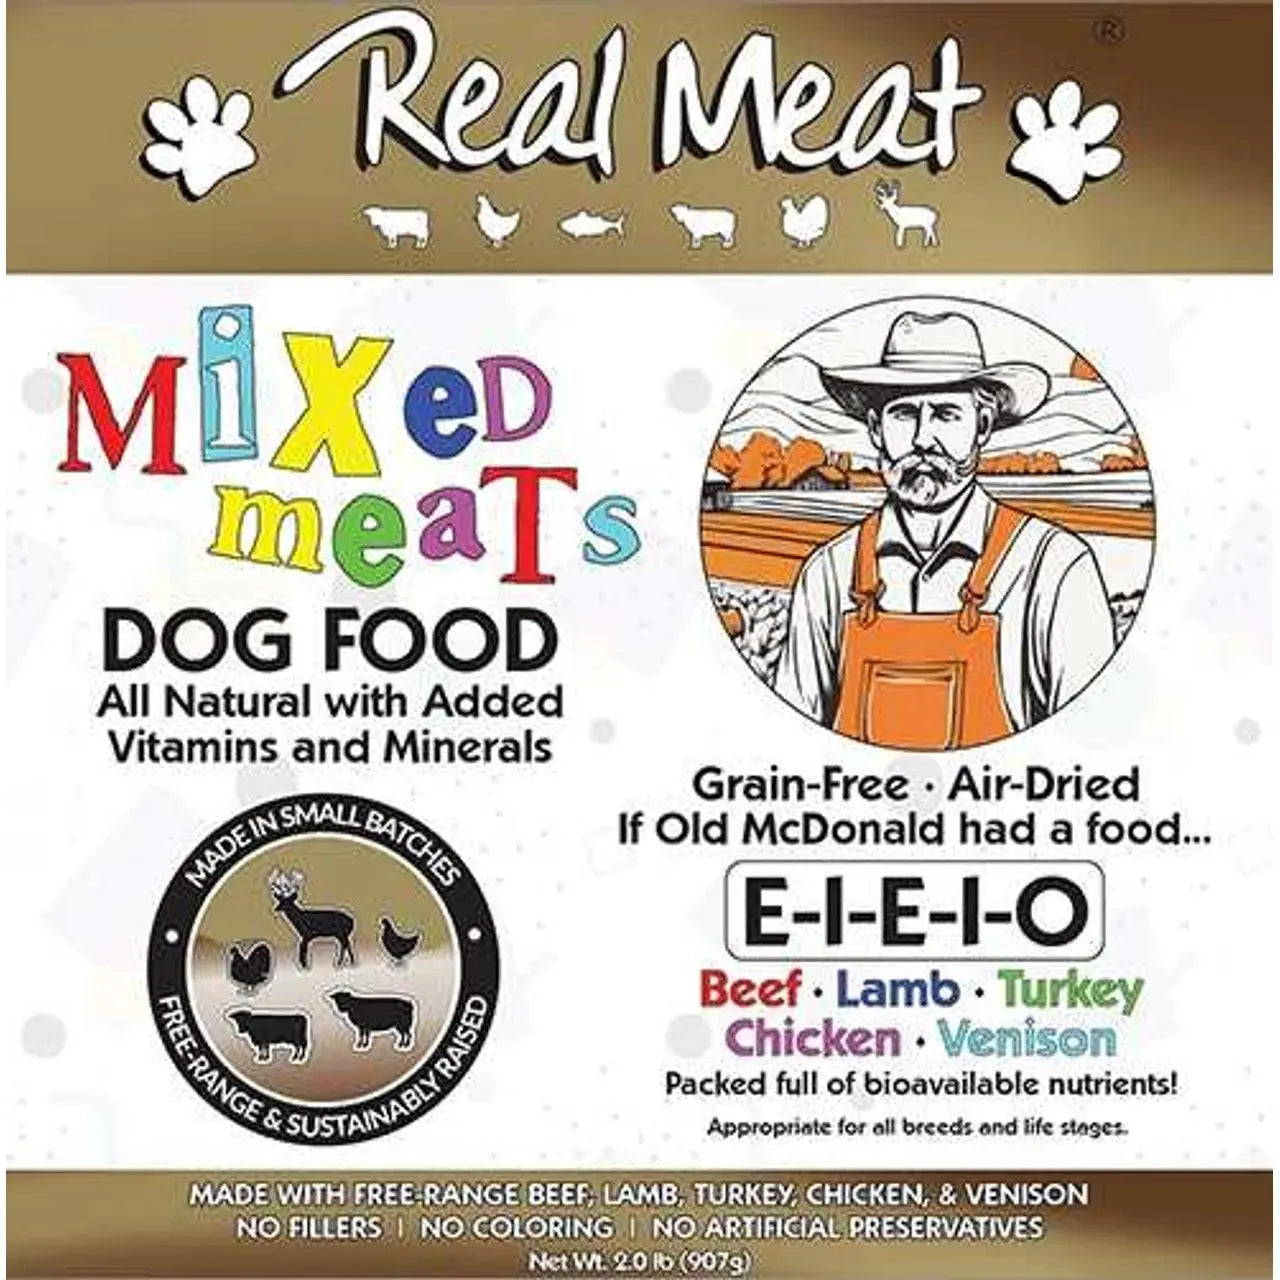 The Real Meat Air-Dried Mixed Meat Eeieeio  Dog & Cat Food 2lb Real Meat®